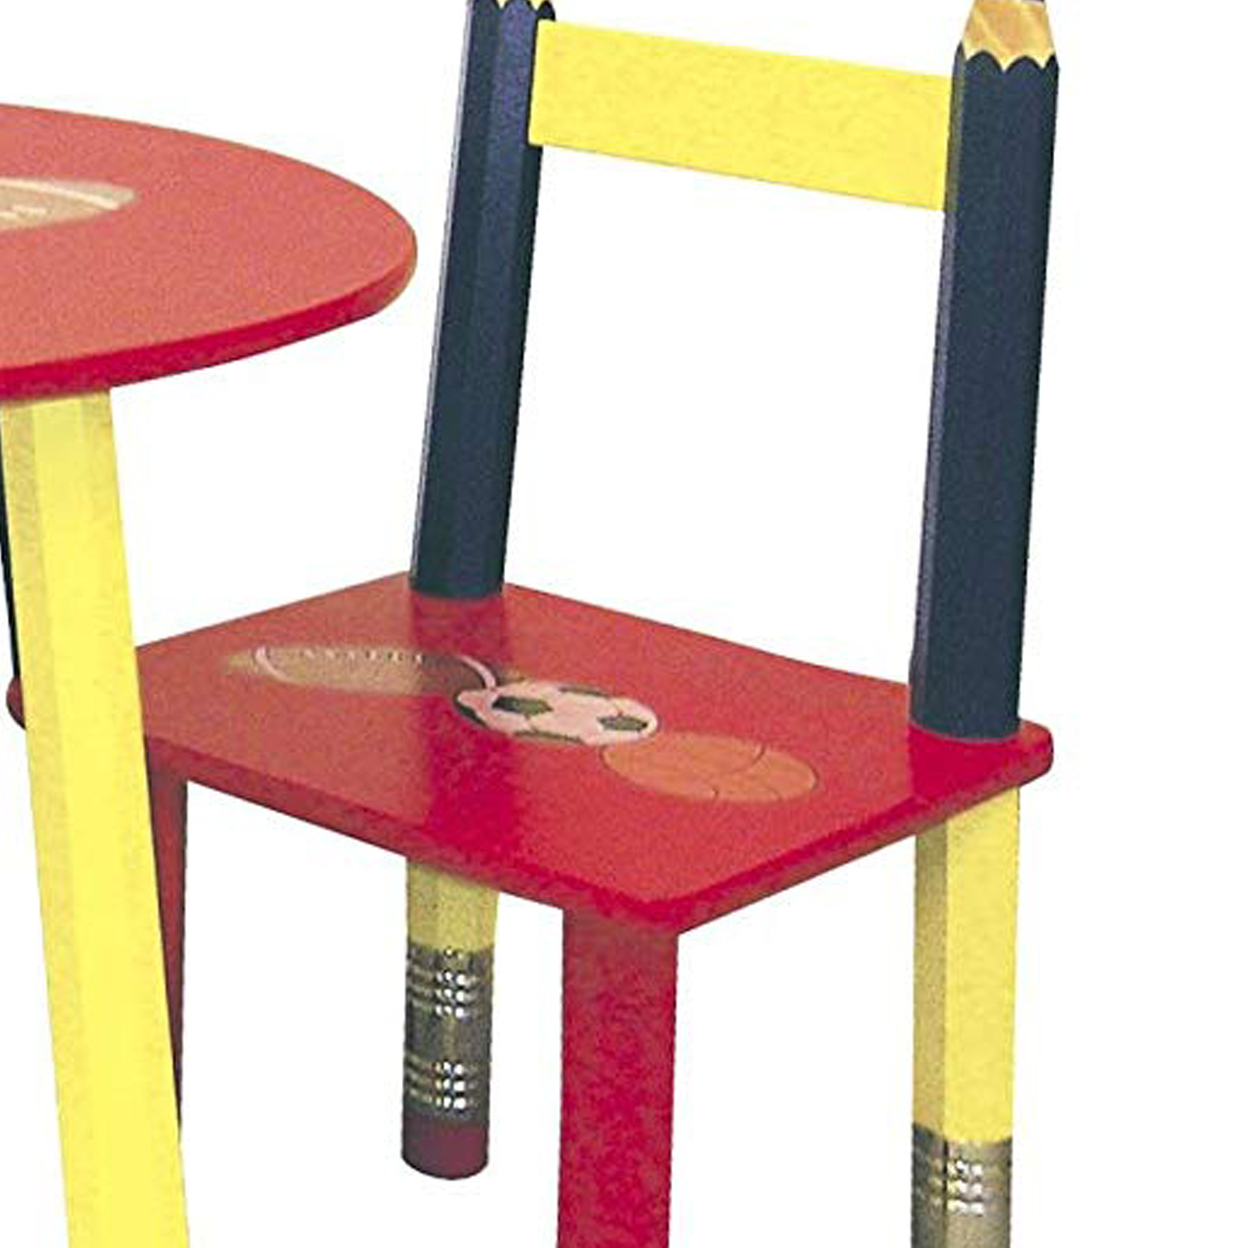 3 Piece Kids Pencil Themed Table Set With 2 Chairs, Multicolor- Saltoro Sherpi